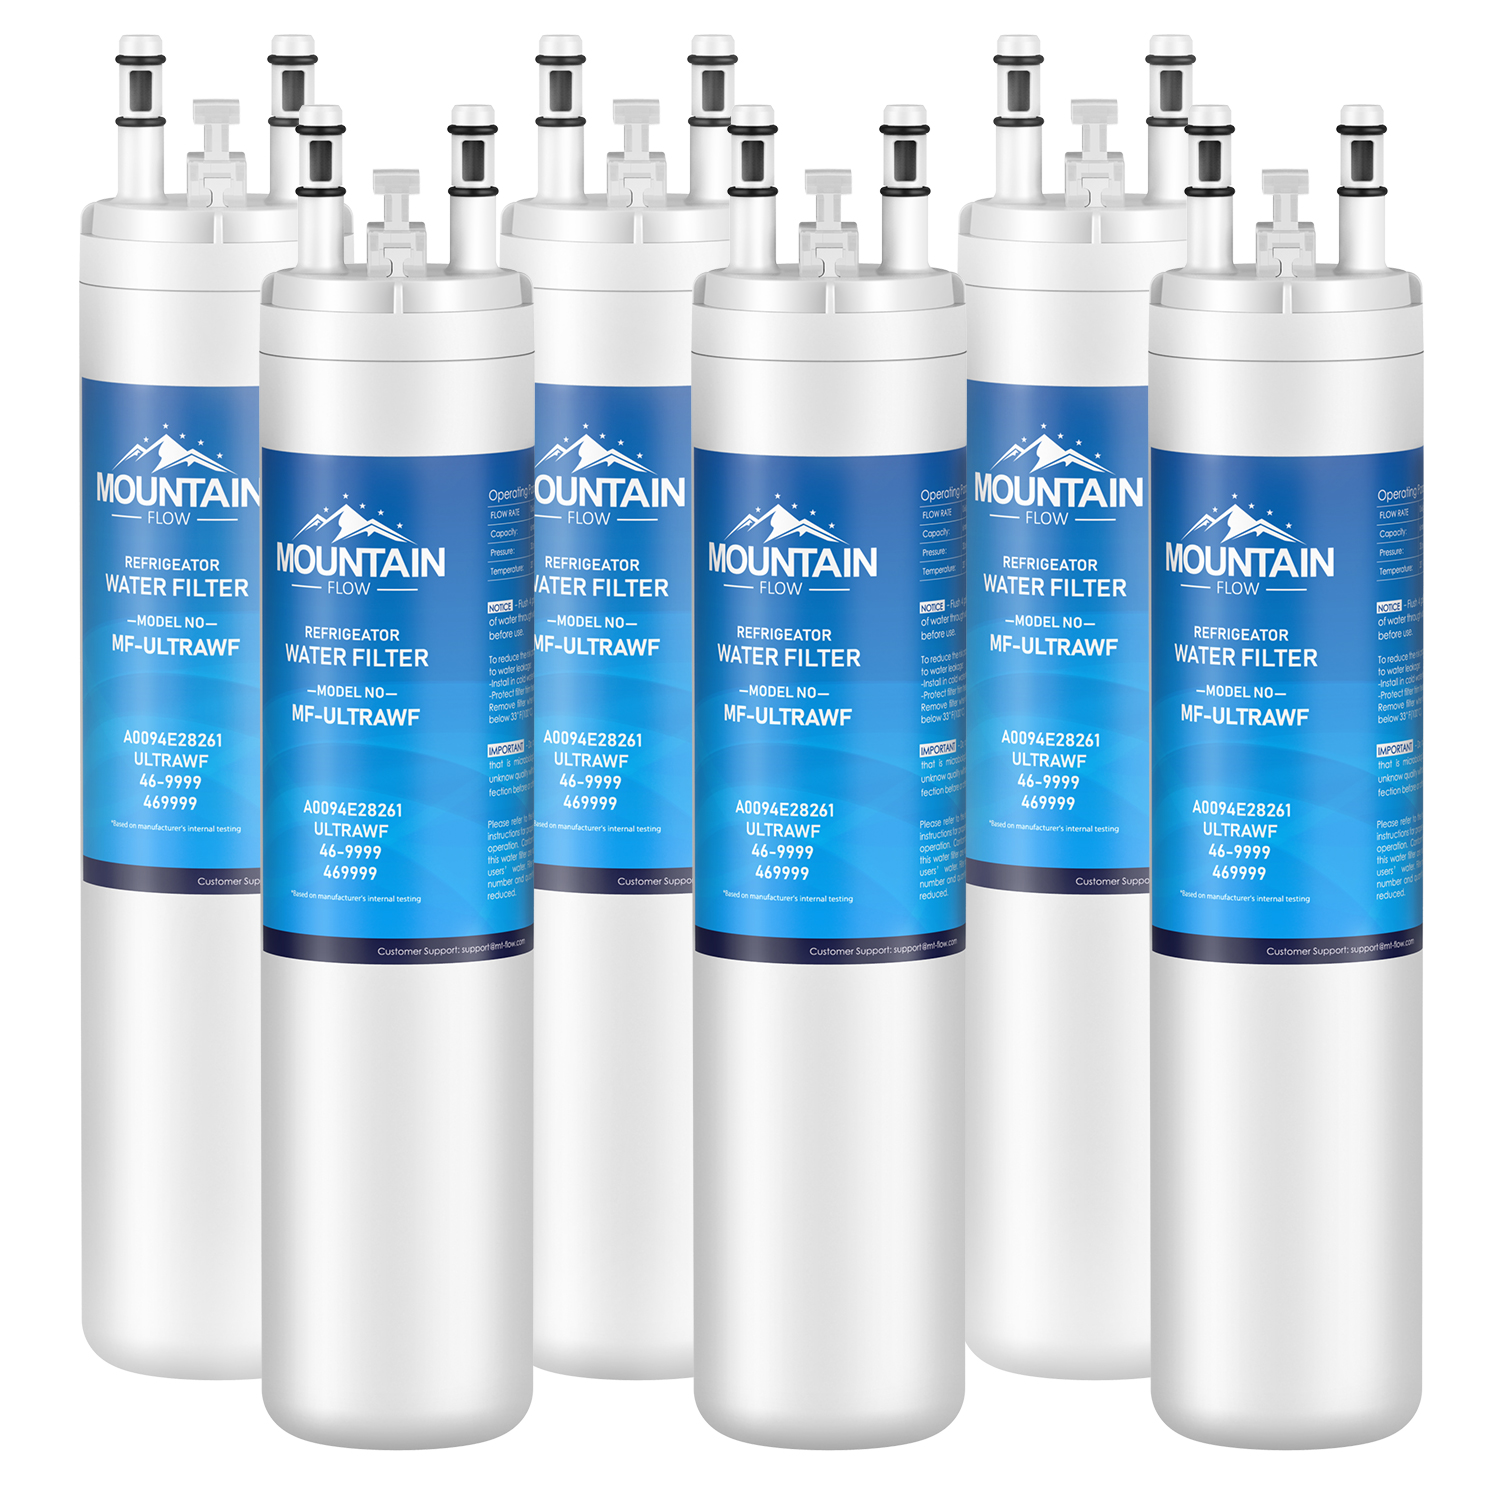 PureSource Ultra - ULTRAWF Water Filter Compatible 46-9999, 6Packs